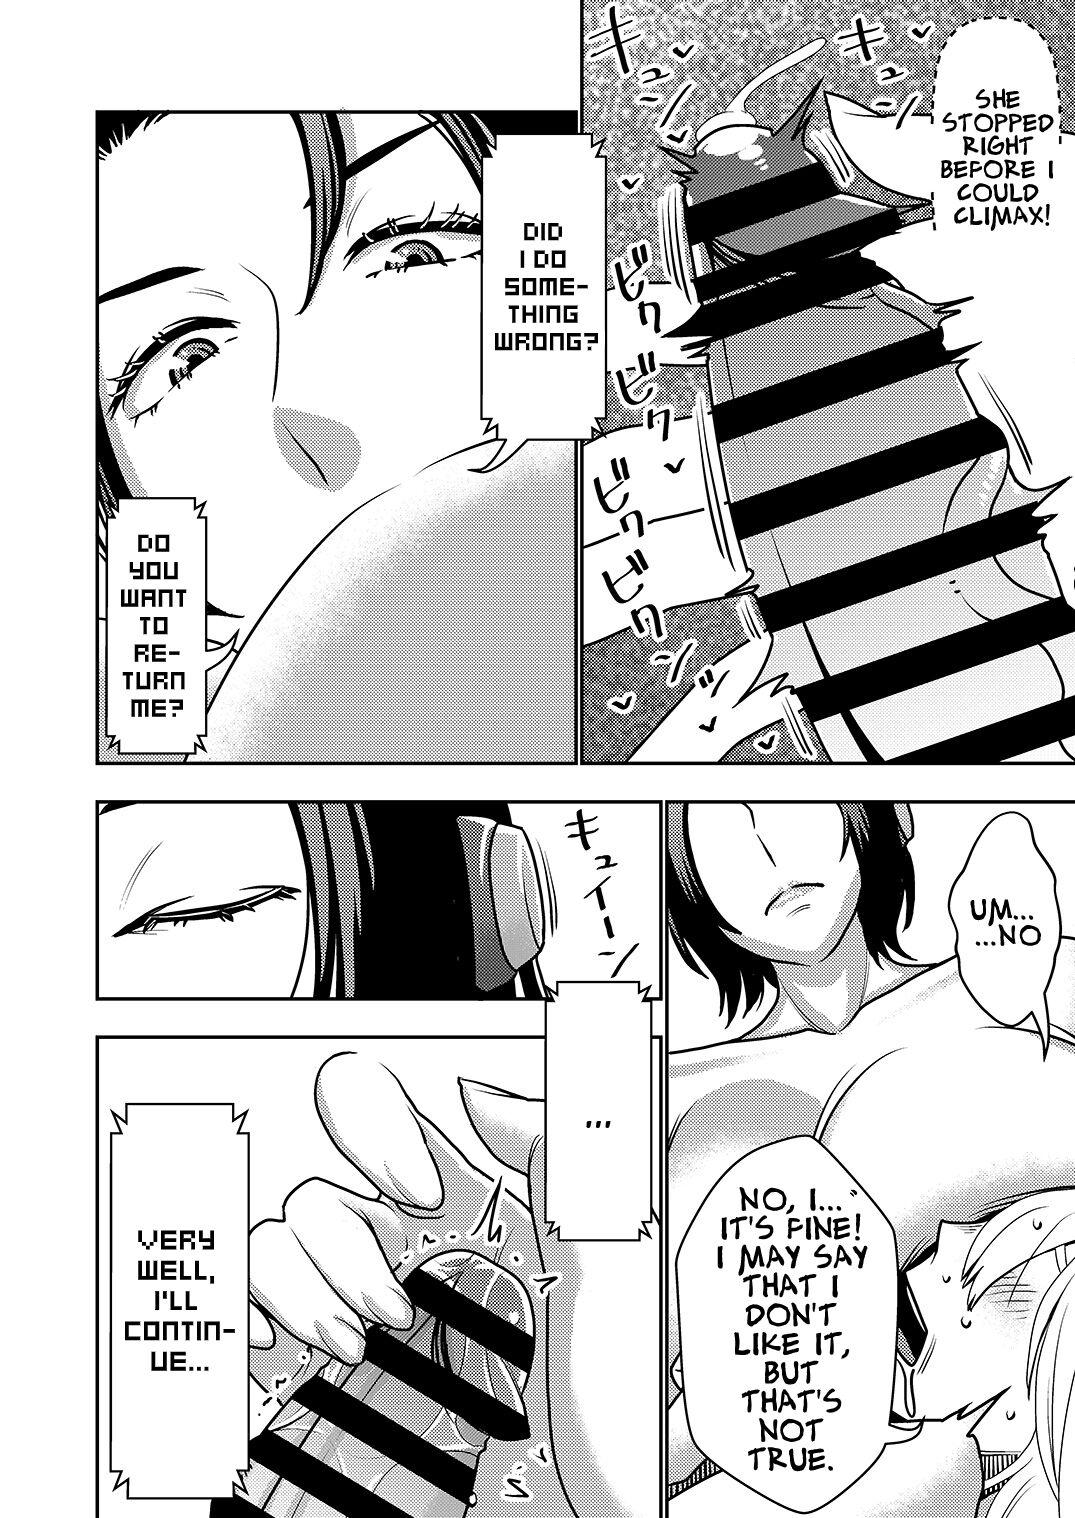 Rough Sex This Defective Sexaroid is TOO LEWD, so I'm thinking of returning it! - Original Amature Allure - Page 12